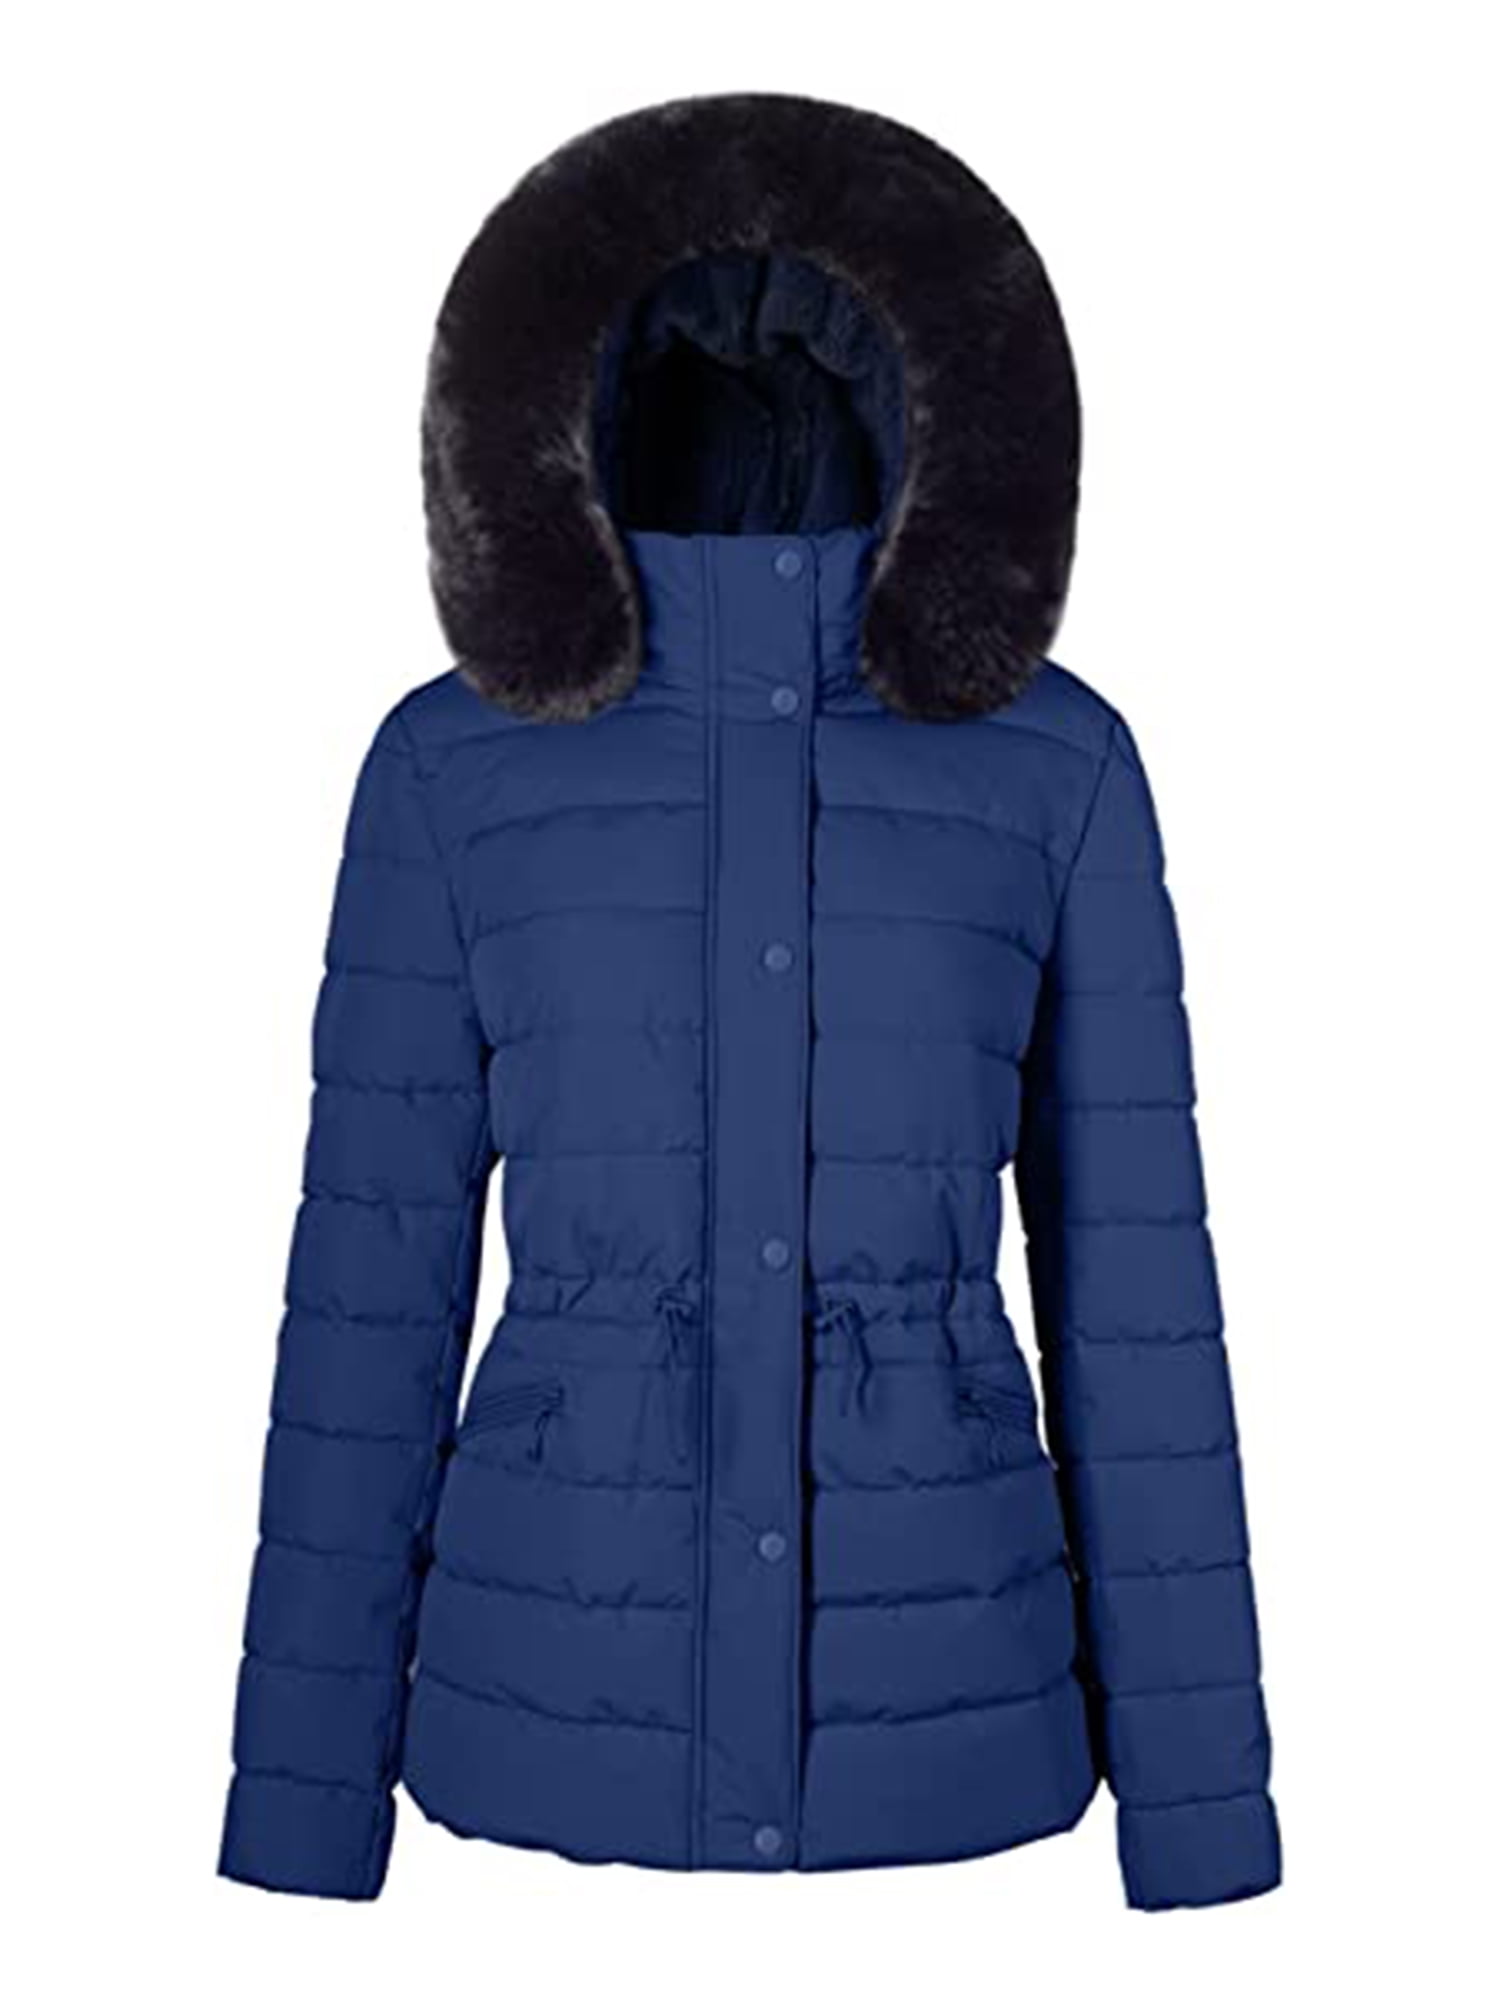 Women’s Winter Quilted Puffer Coat Fleece Lined Warm Winter Jacket with ...